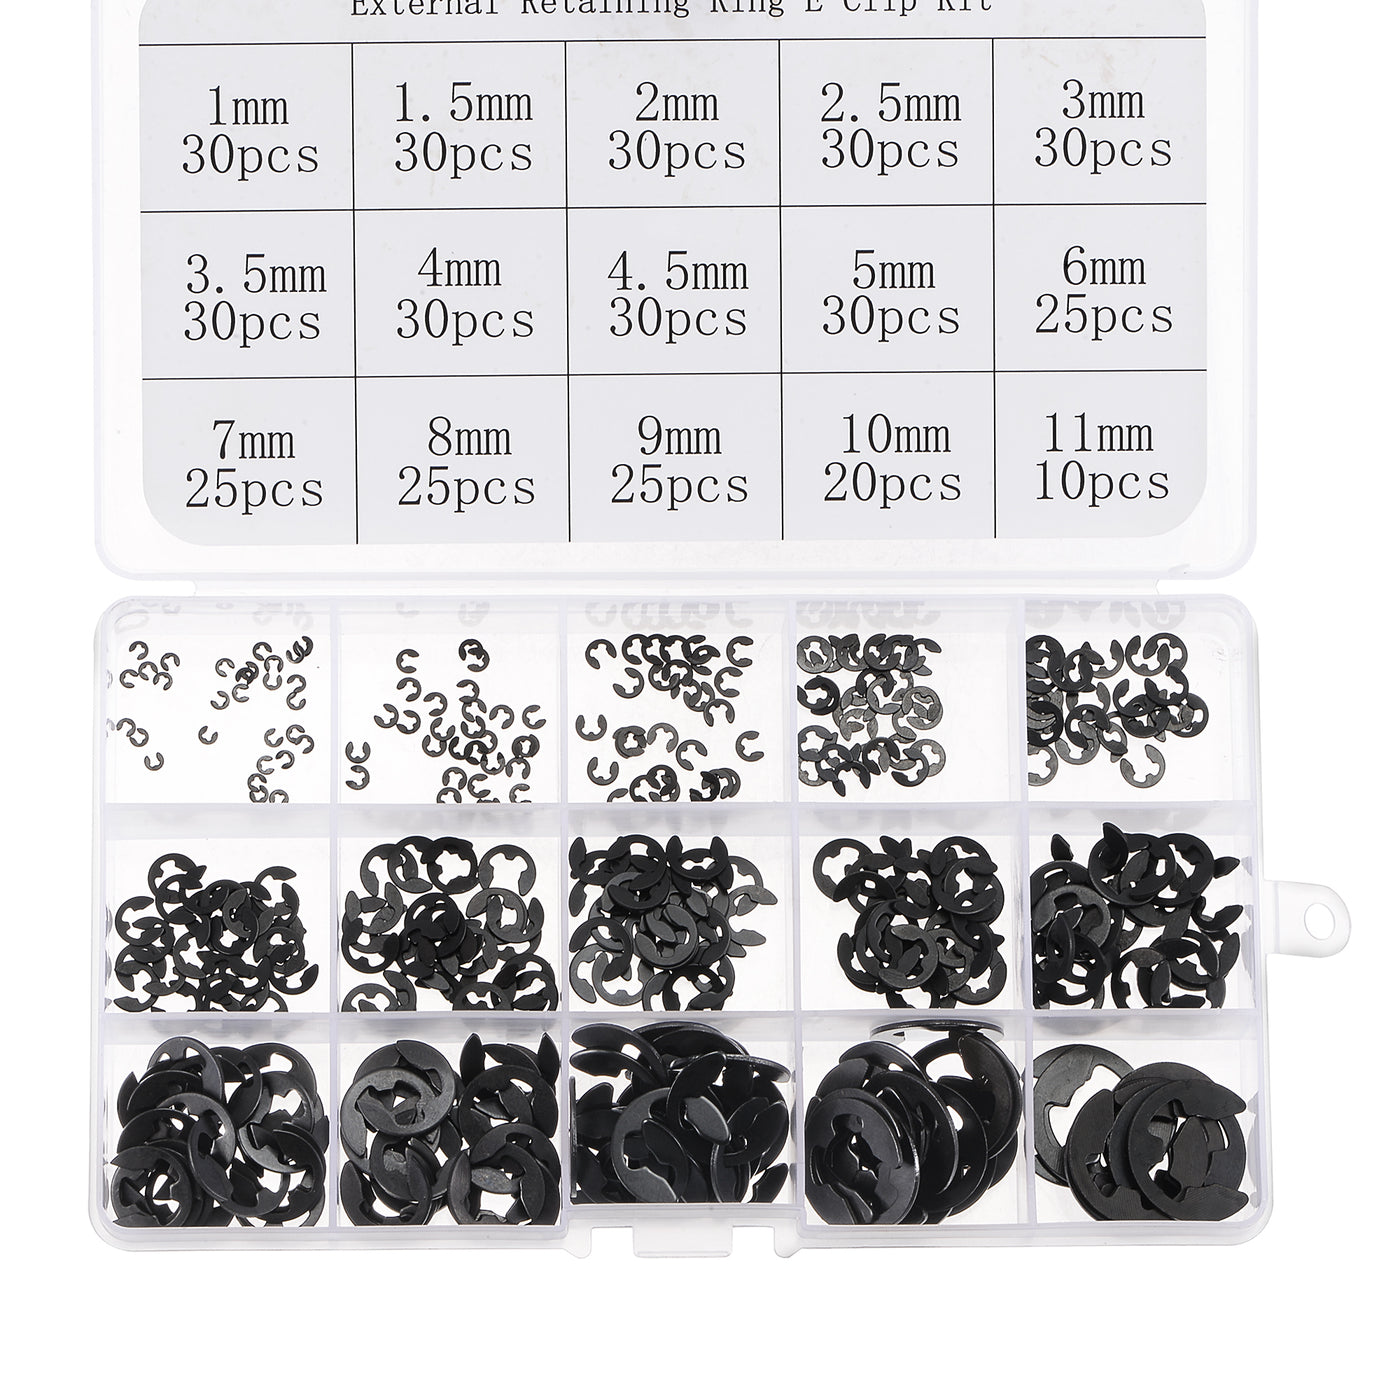 uxcell Uxcell E-Clip Circlip 400Pcs 15-Size External Retaining Shaft Ring Carbon Steel Set